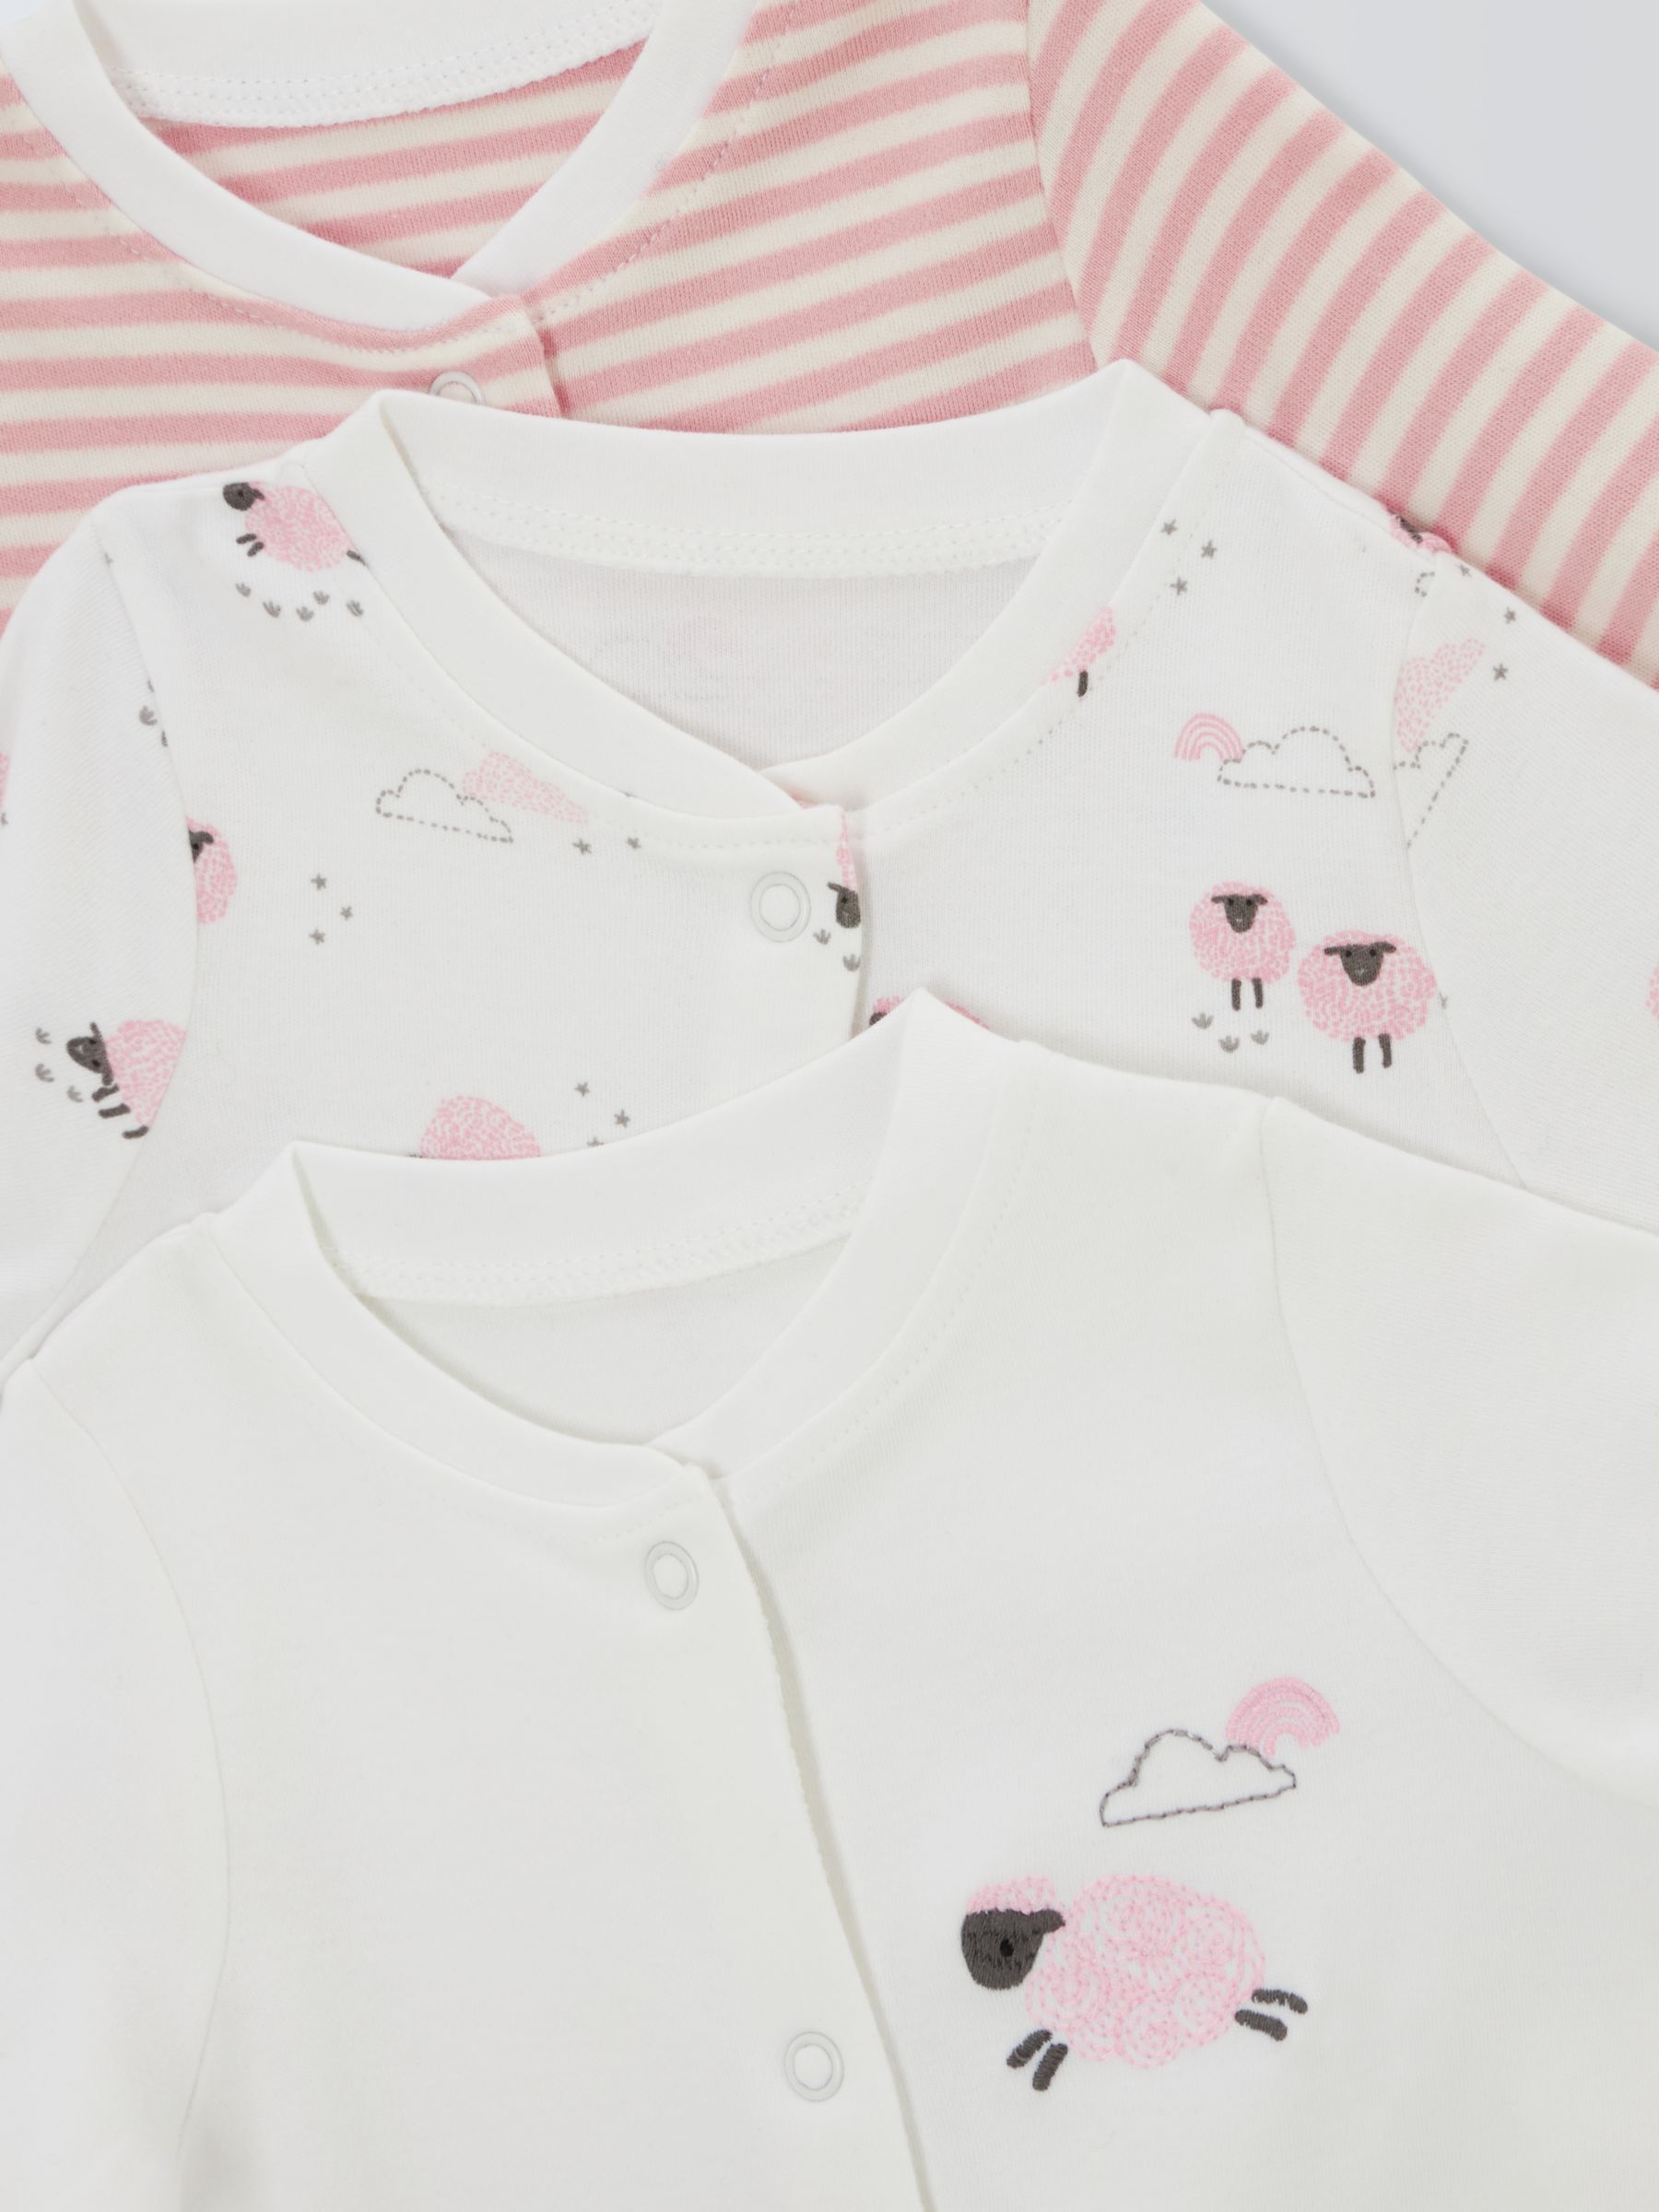 John Lewis Baby Sheep Long Sleeve Sleepsuits, Pack of 3, Pink, Early Baby